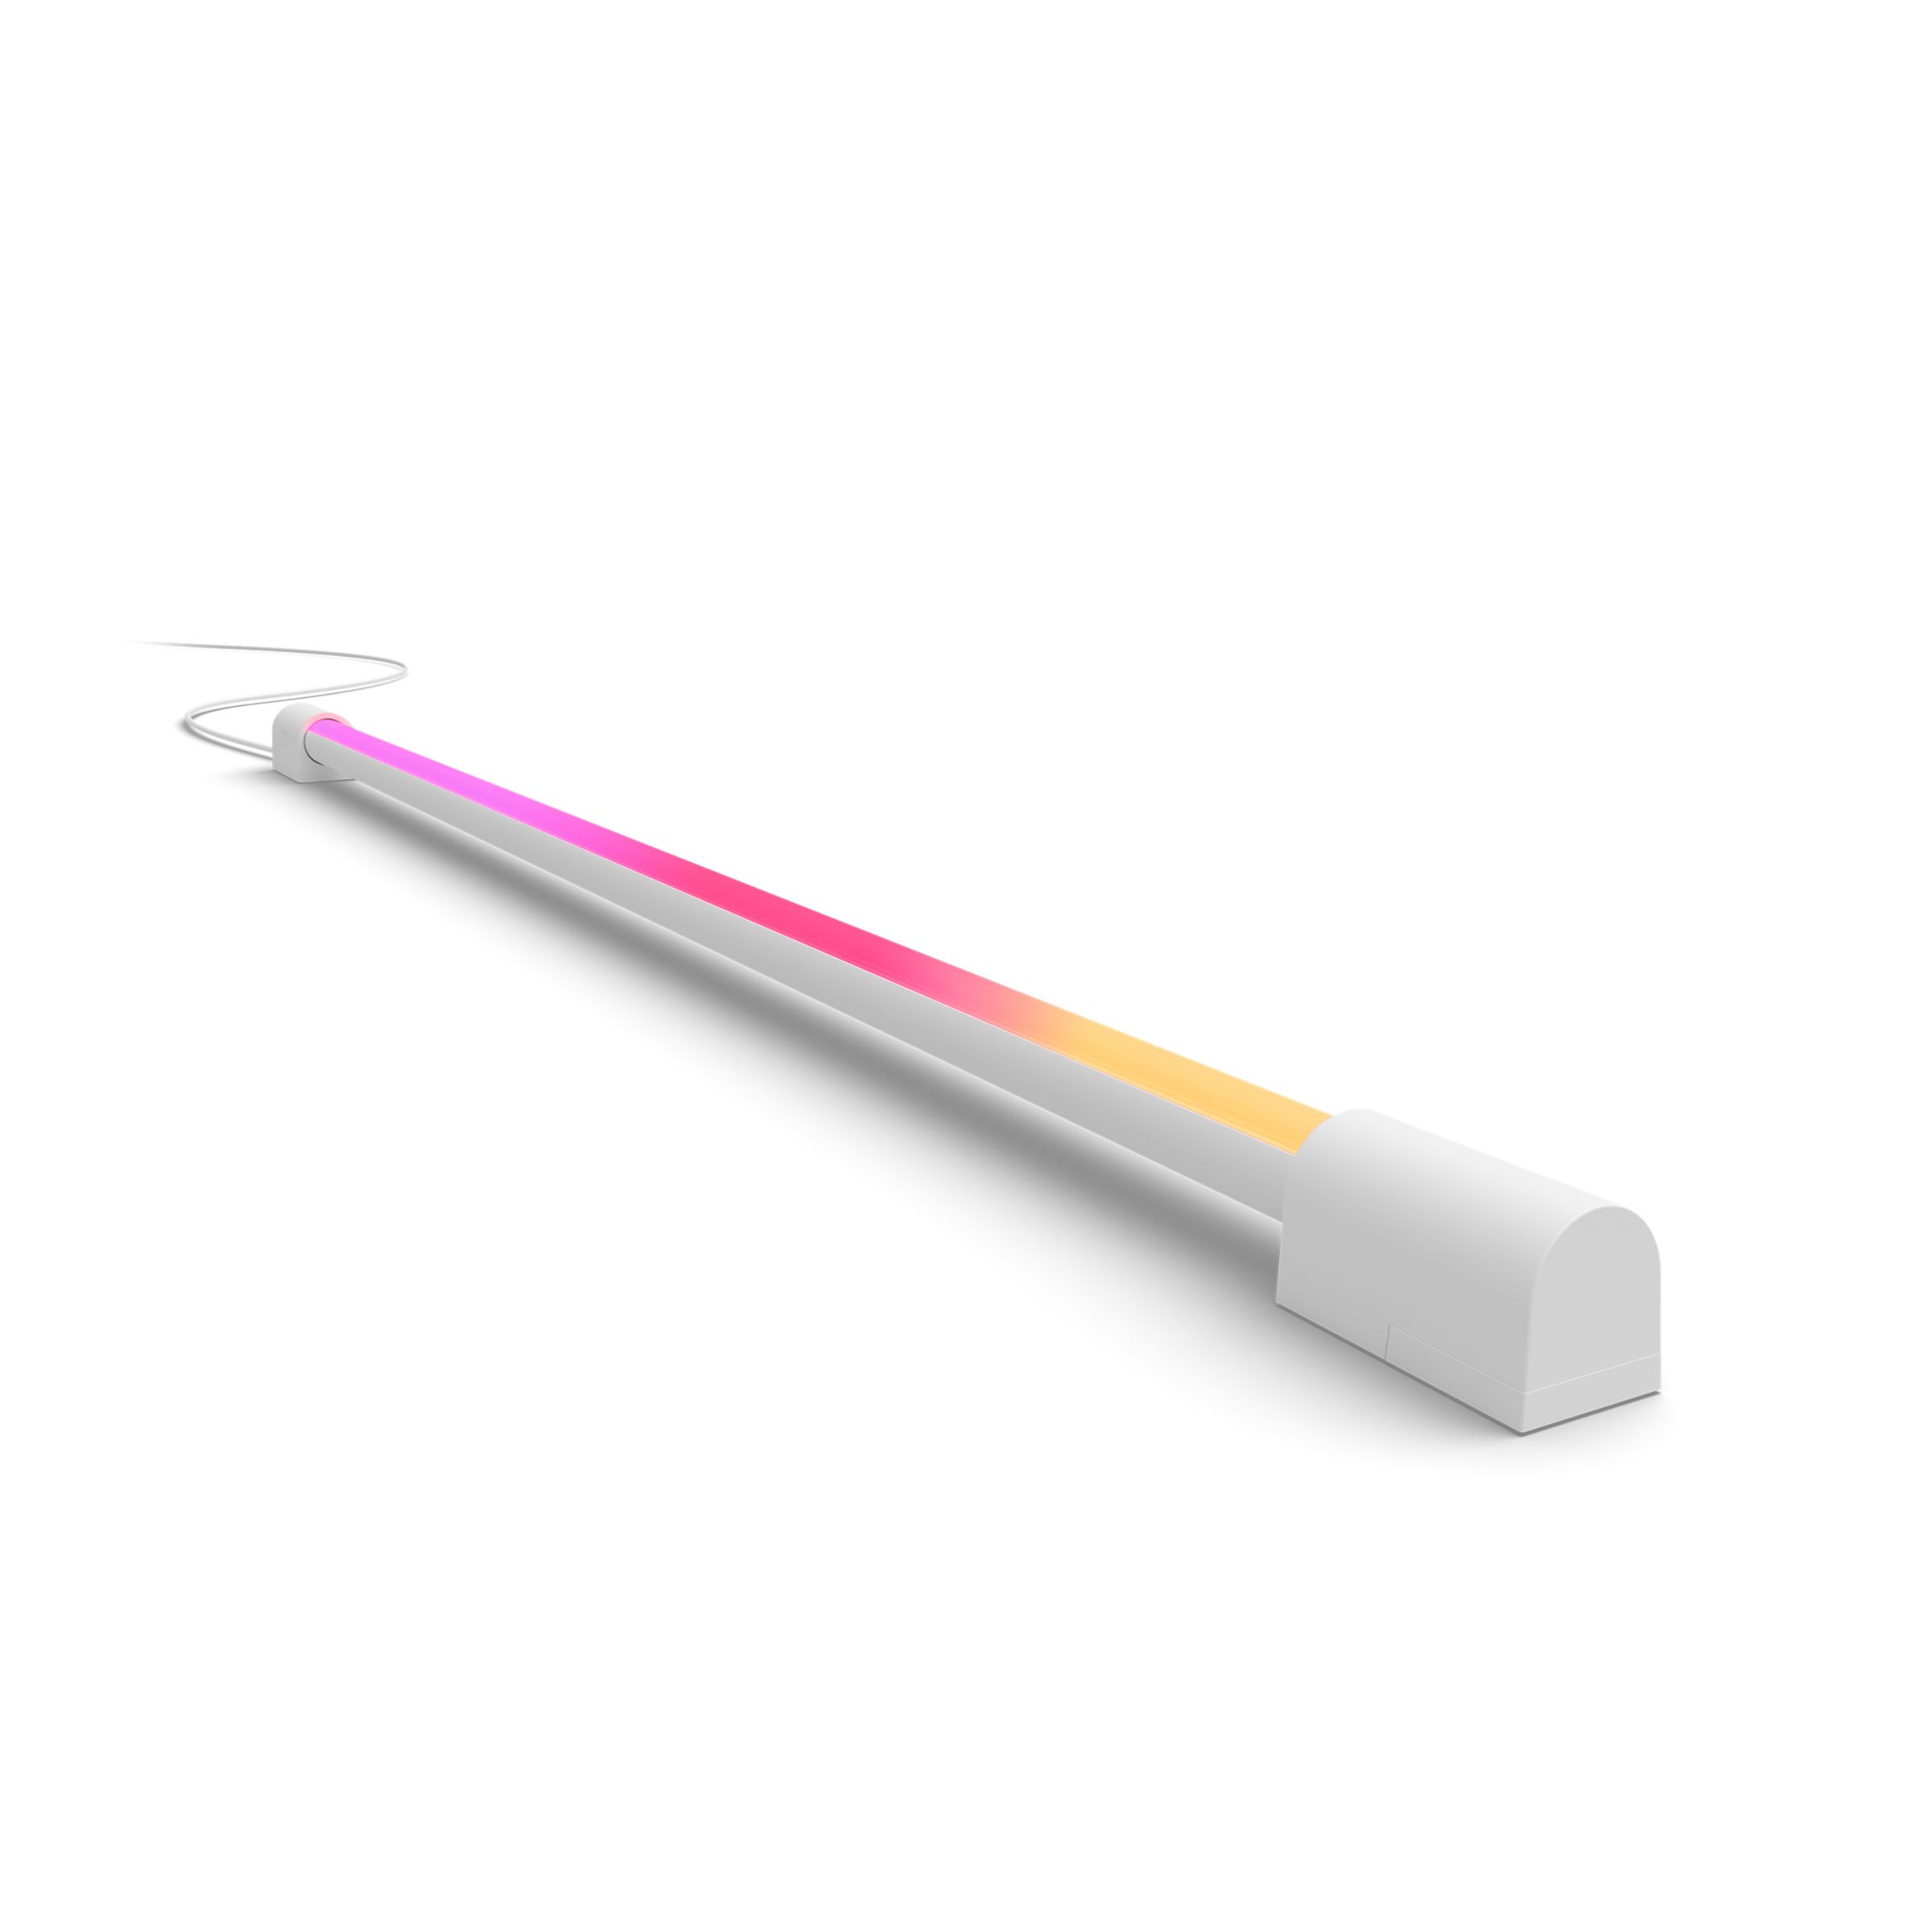 Hue Play Gradient Light Tube Compact White for TV - White and Colour  Ambiance | Philips Hue US